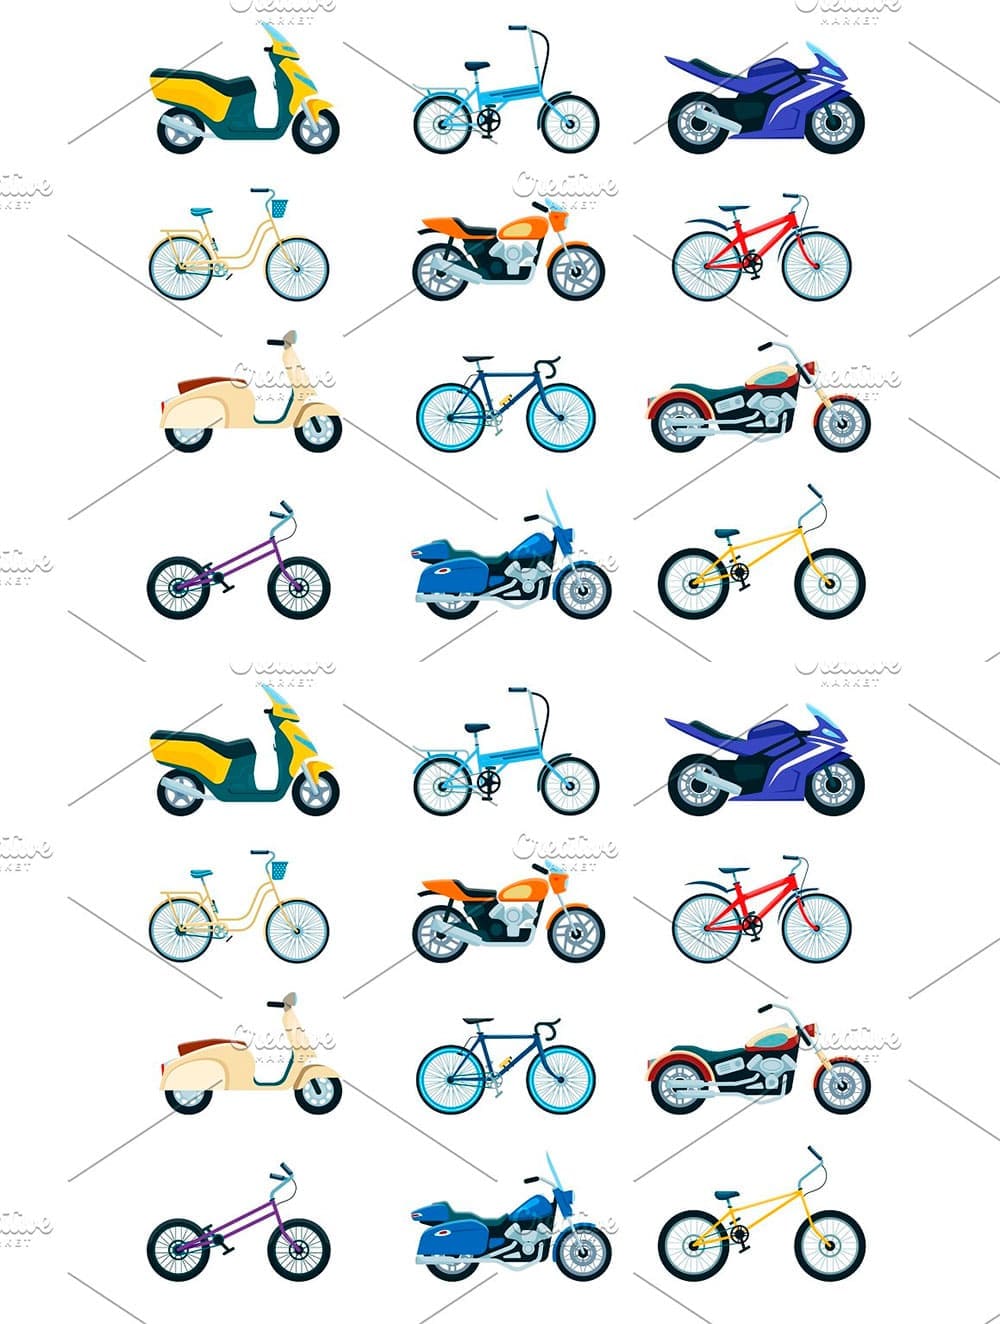 Motorcycles and bikes, picture for pinterest.